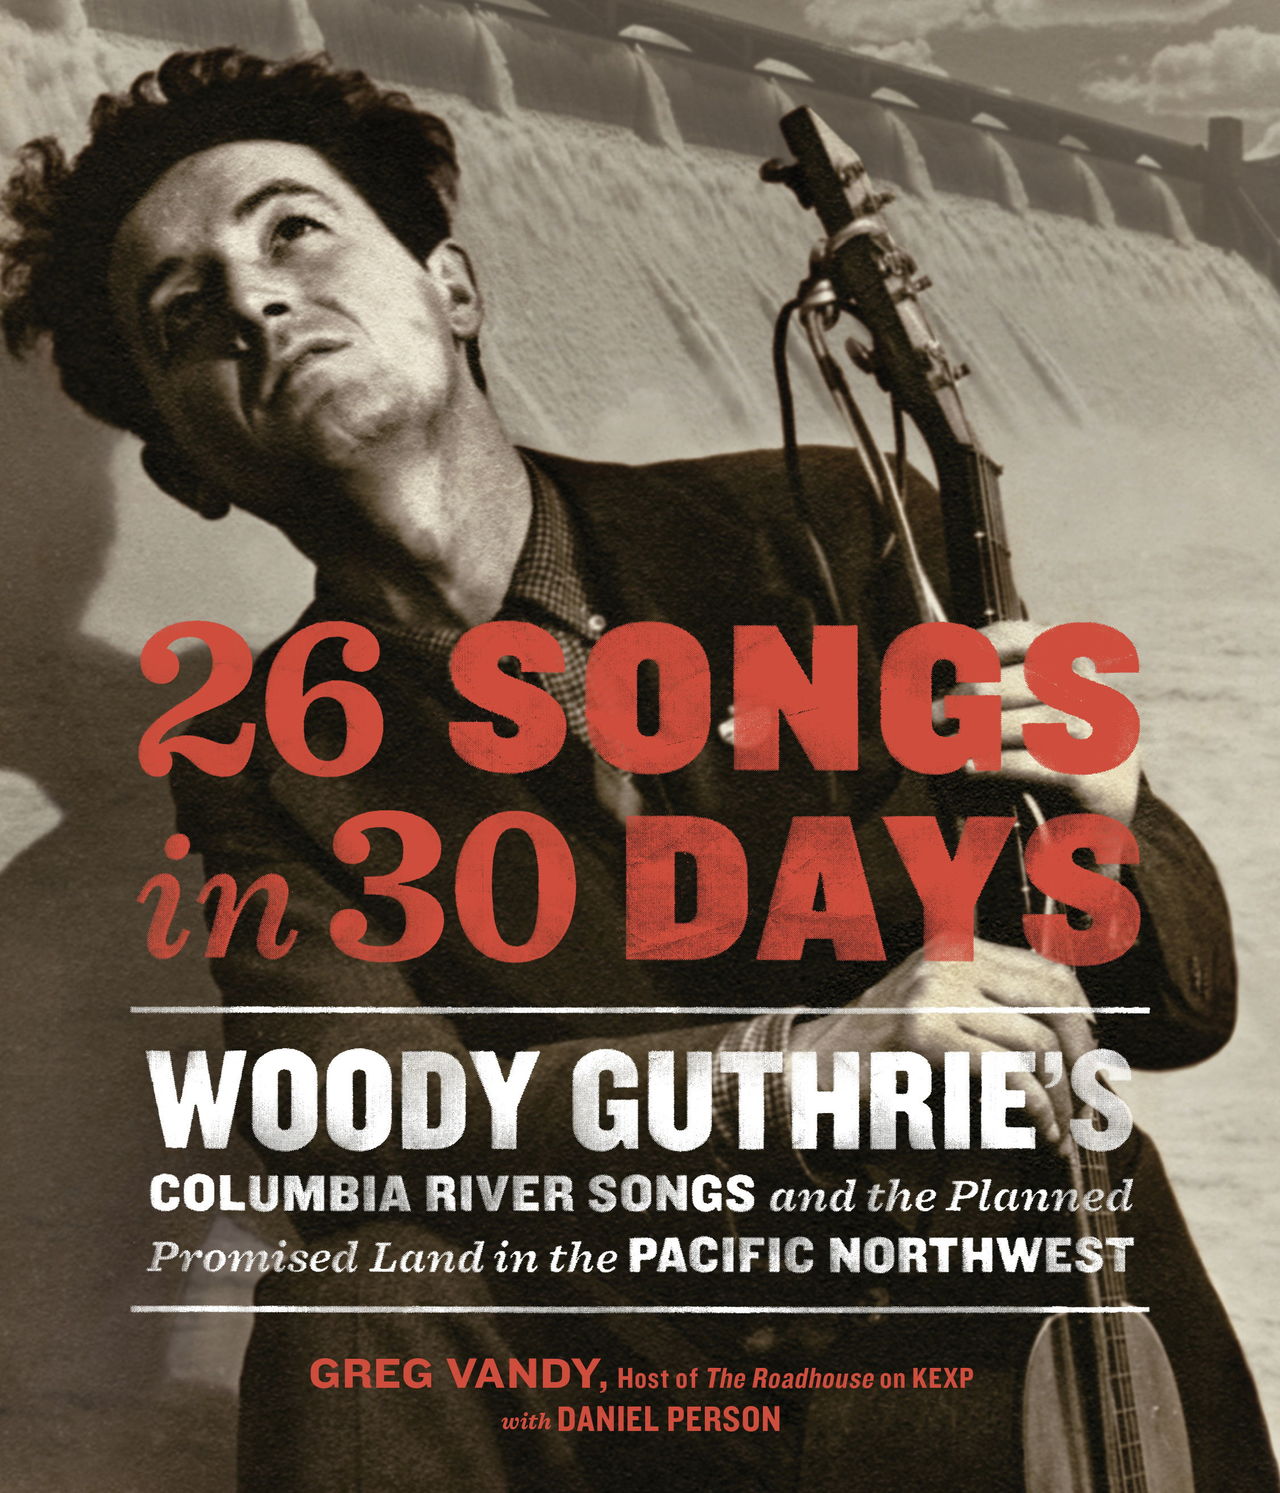 “26 Songs in 30 Days” by Greg Vandy and Daniel Person takes a look back at the songs Woody Guthrie wrote about the Columbia River, the Bonneville Power Administration and the Columbia Basin irrigation project.